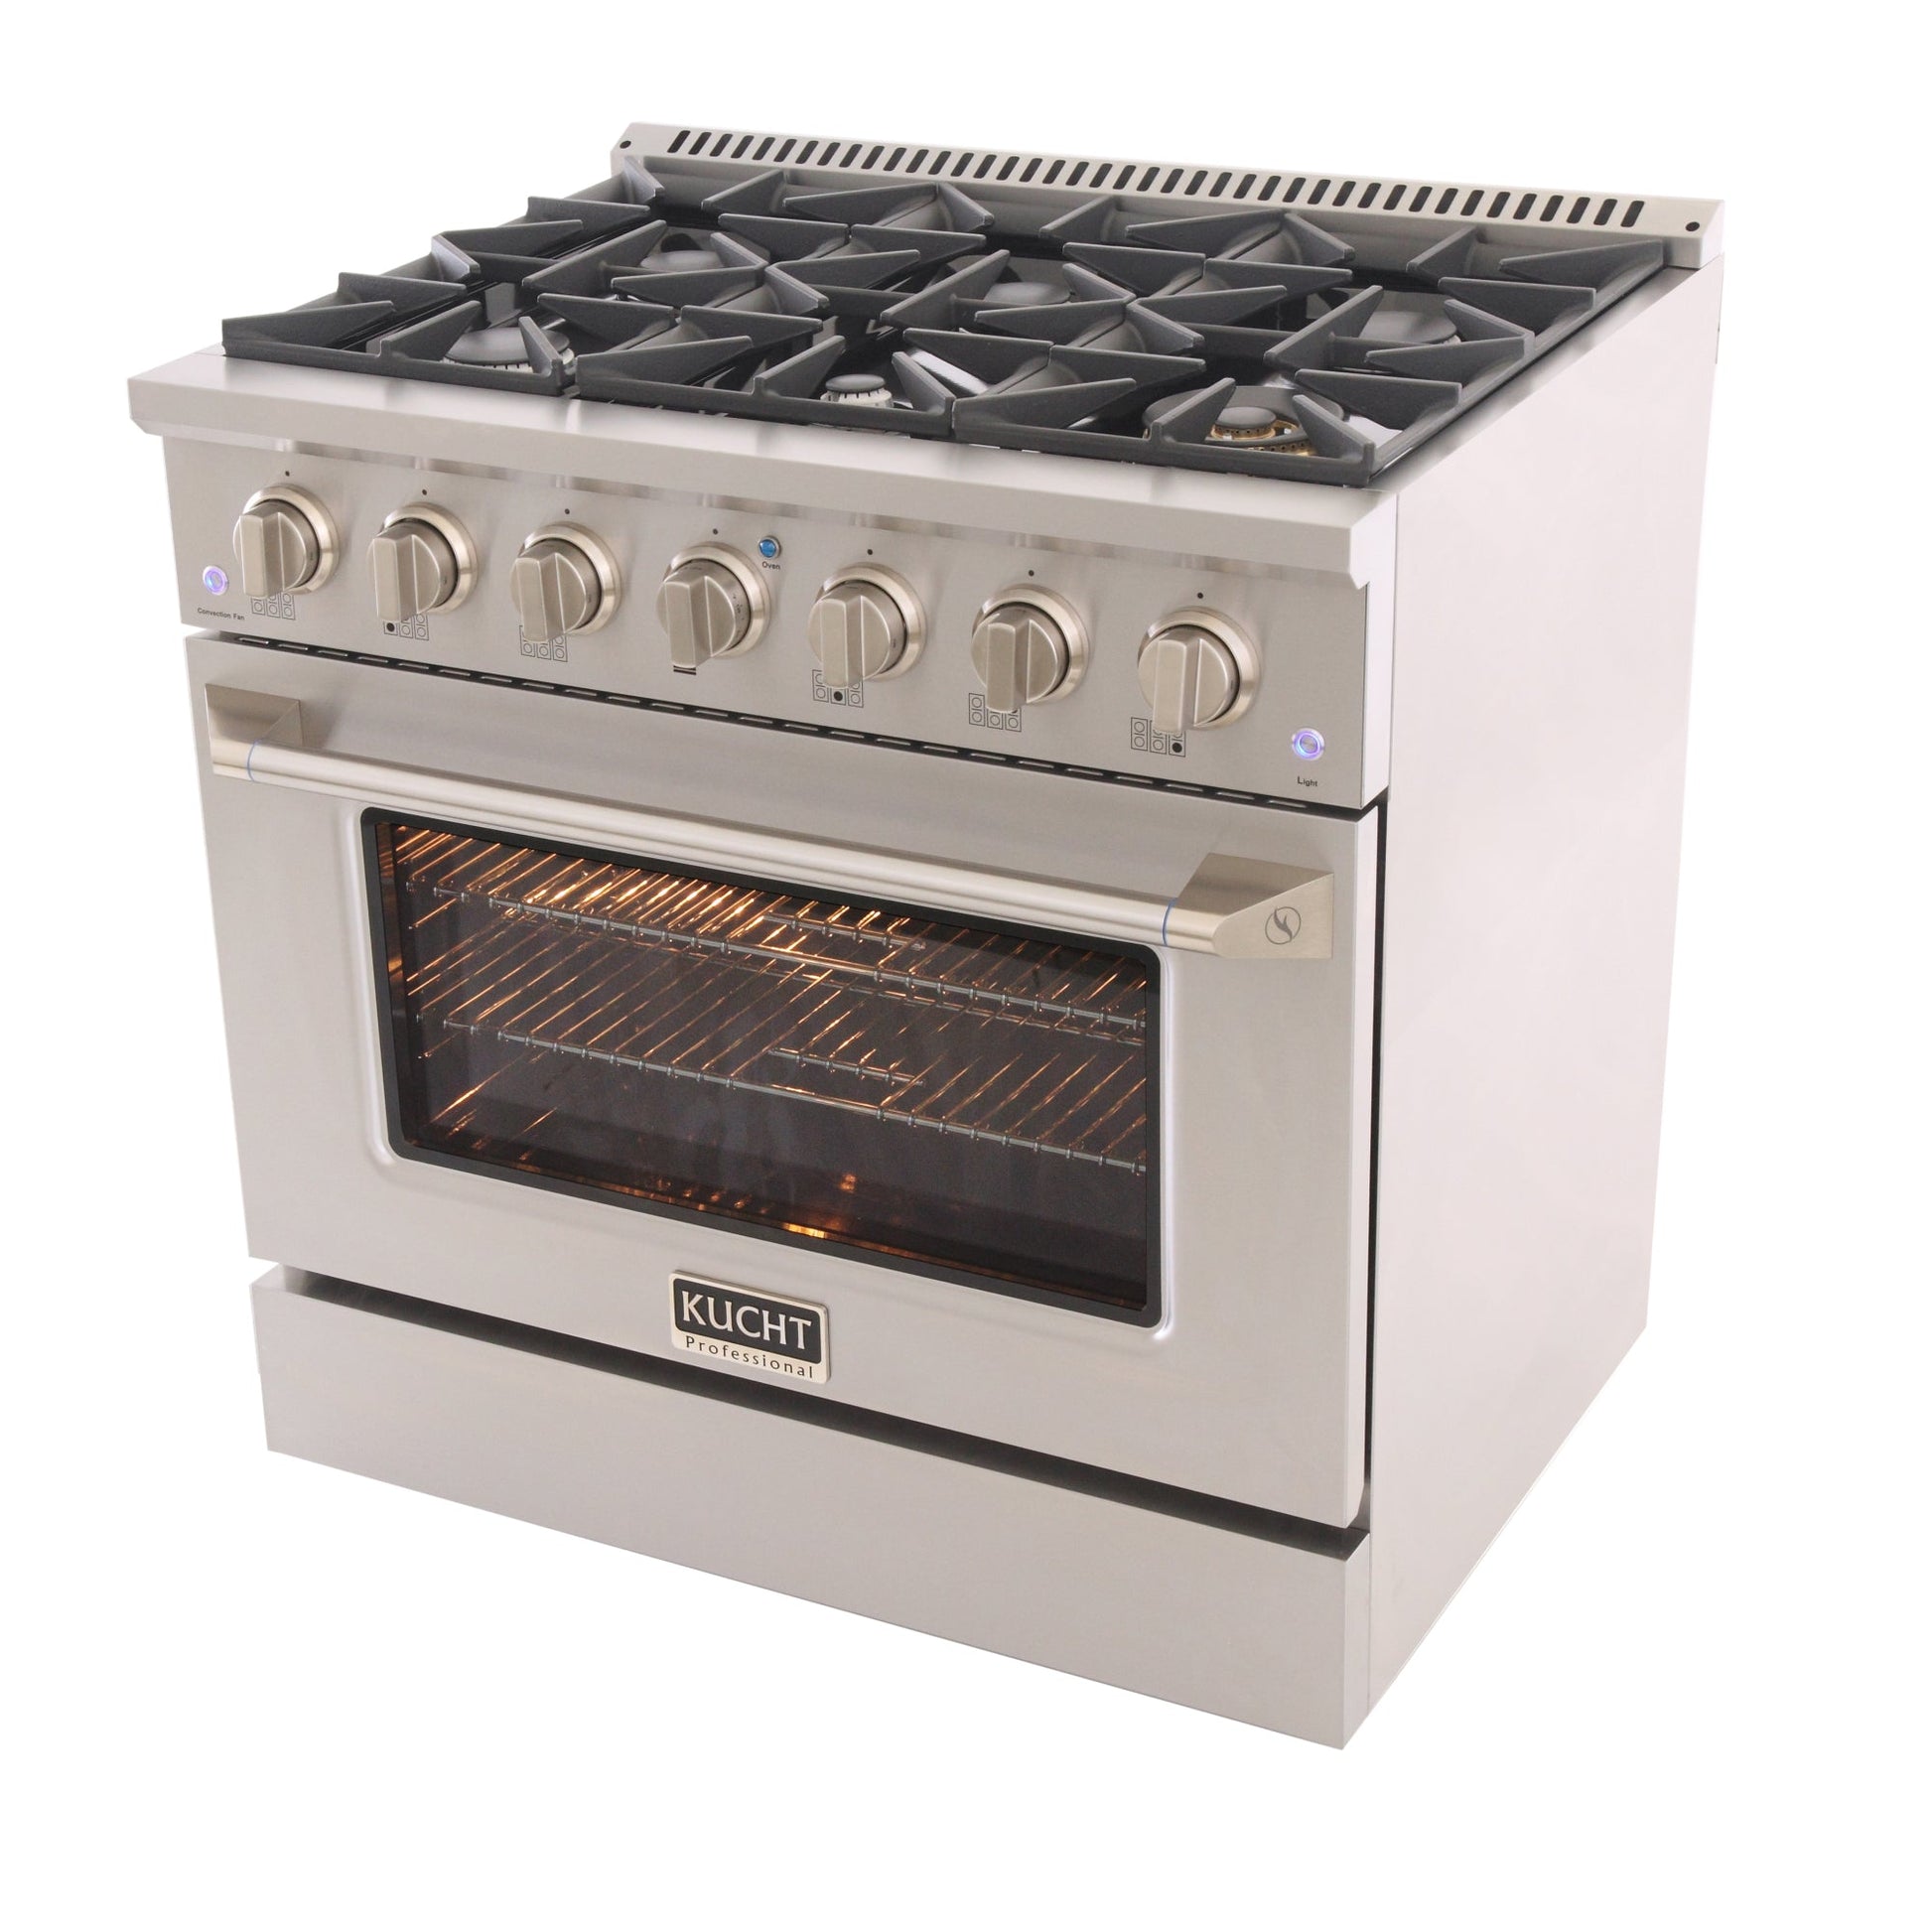 Kucht KNG Series 36" Stainless Steel Freestanding Natural Gas Range With 6 Burners